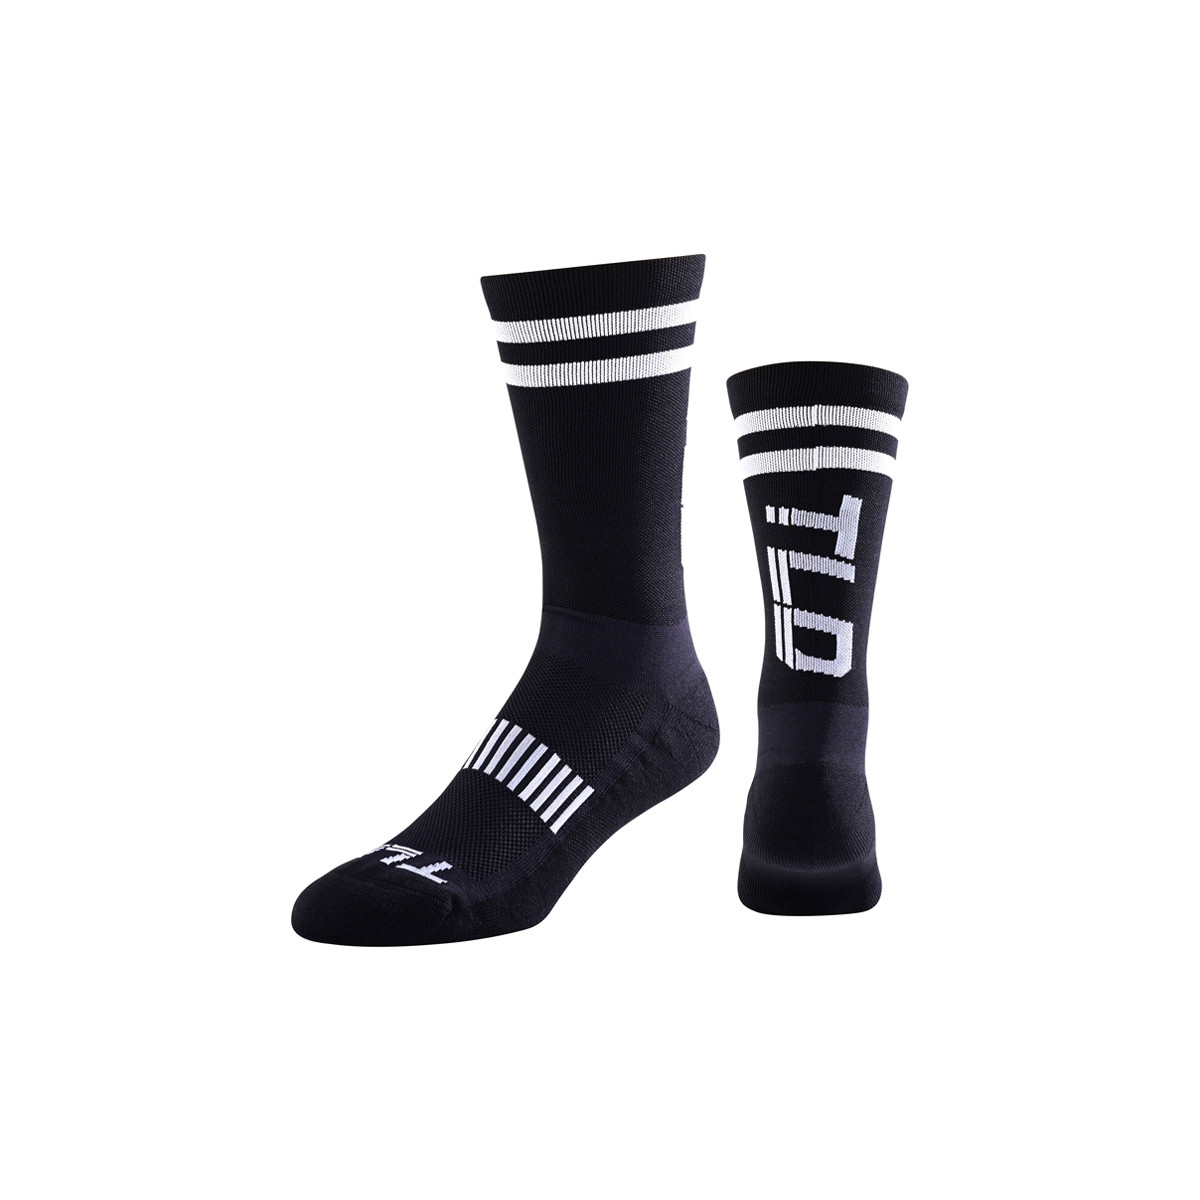 Calcetines ciclismo Troy Lee Performance Speed negro s23